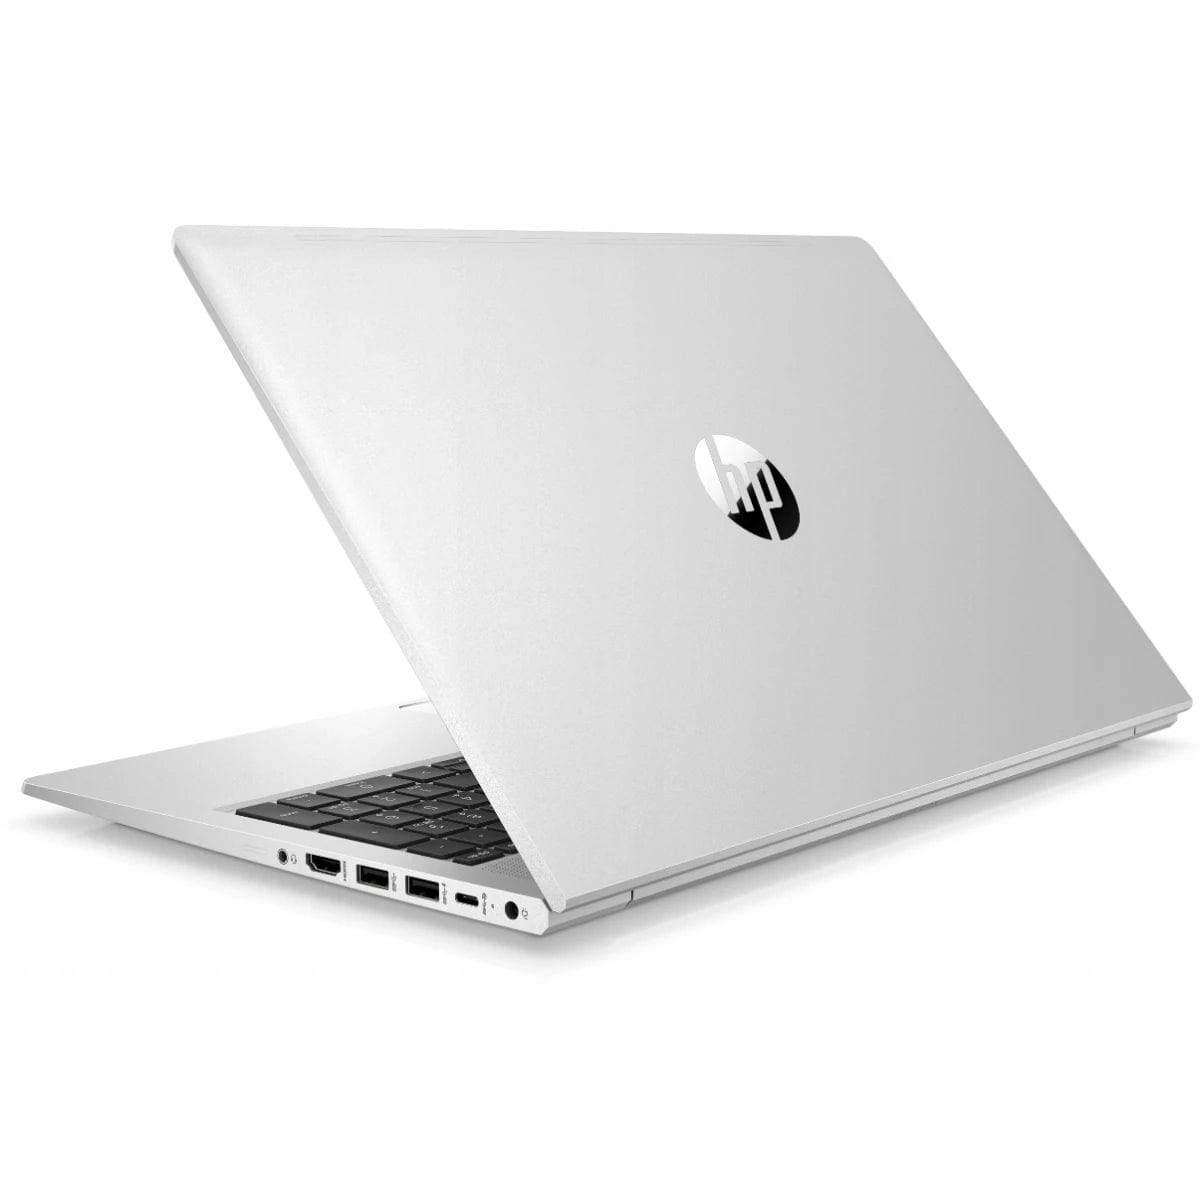 HP Laptops HP ProBook 450 G9 Intel Core i5 12Gen 10-Core Business Class Protected by HP Wolf Security Aluminium & IPS Full HD Display (Customized) - Silver